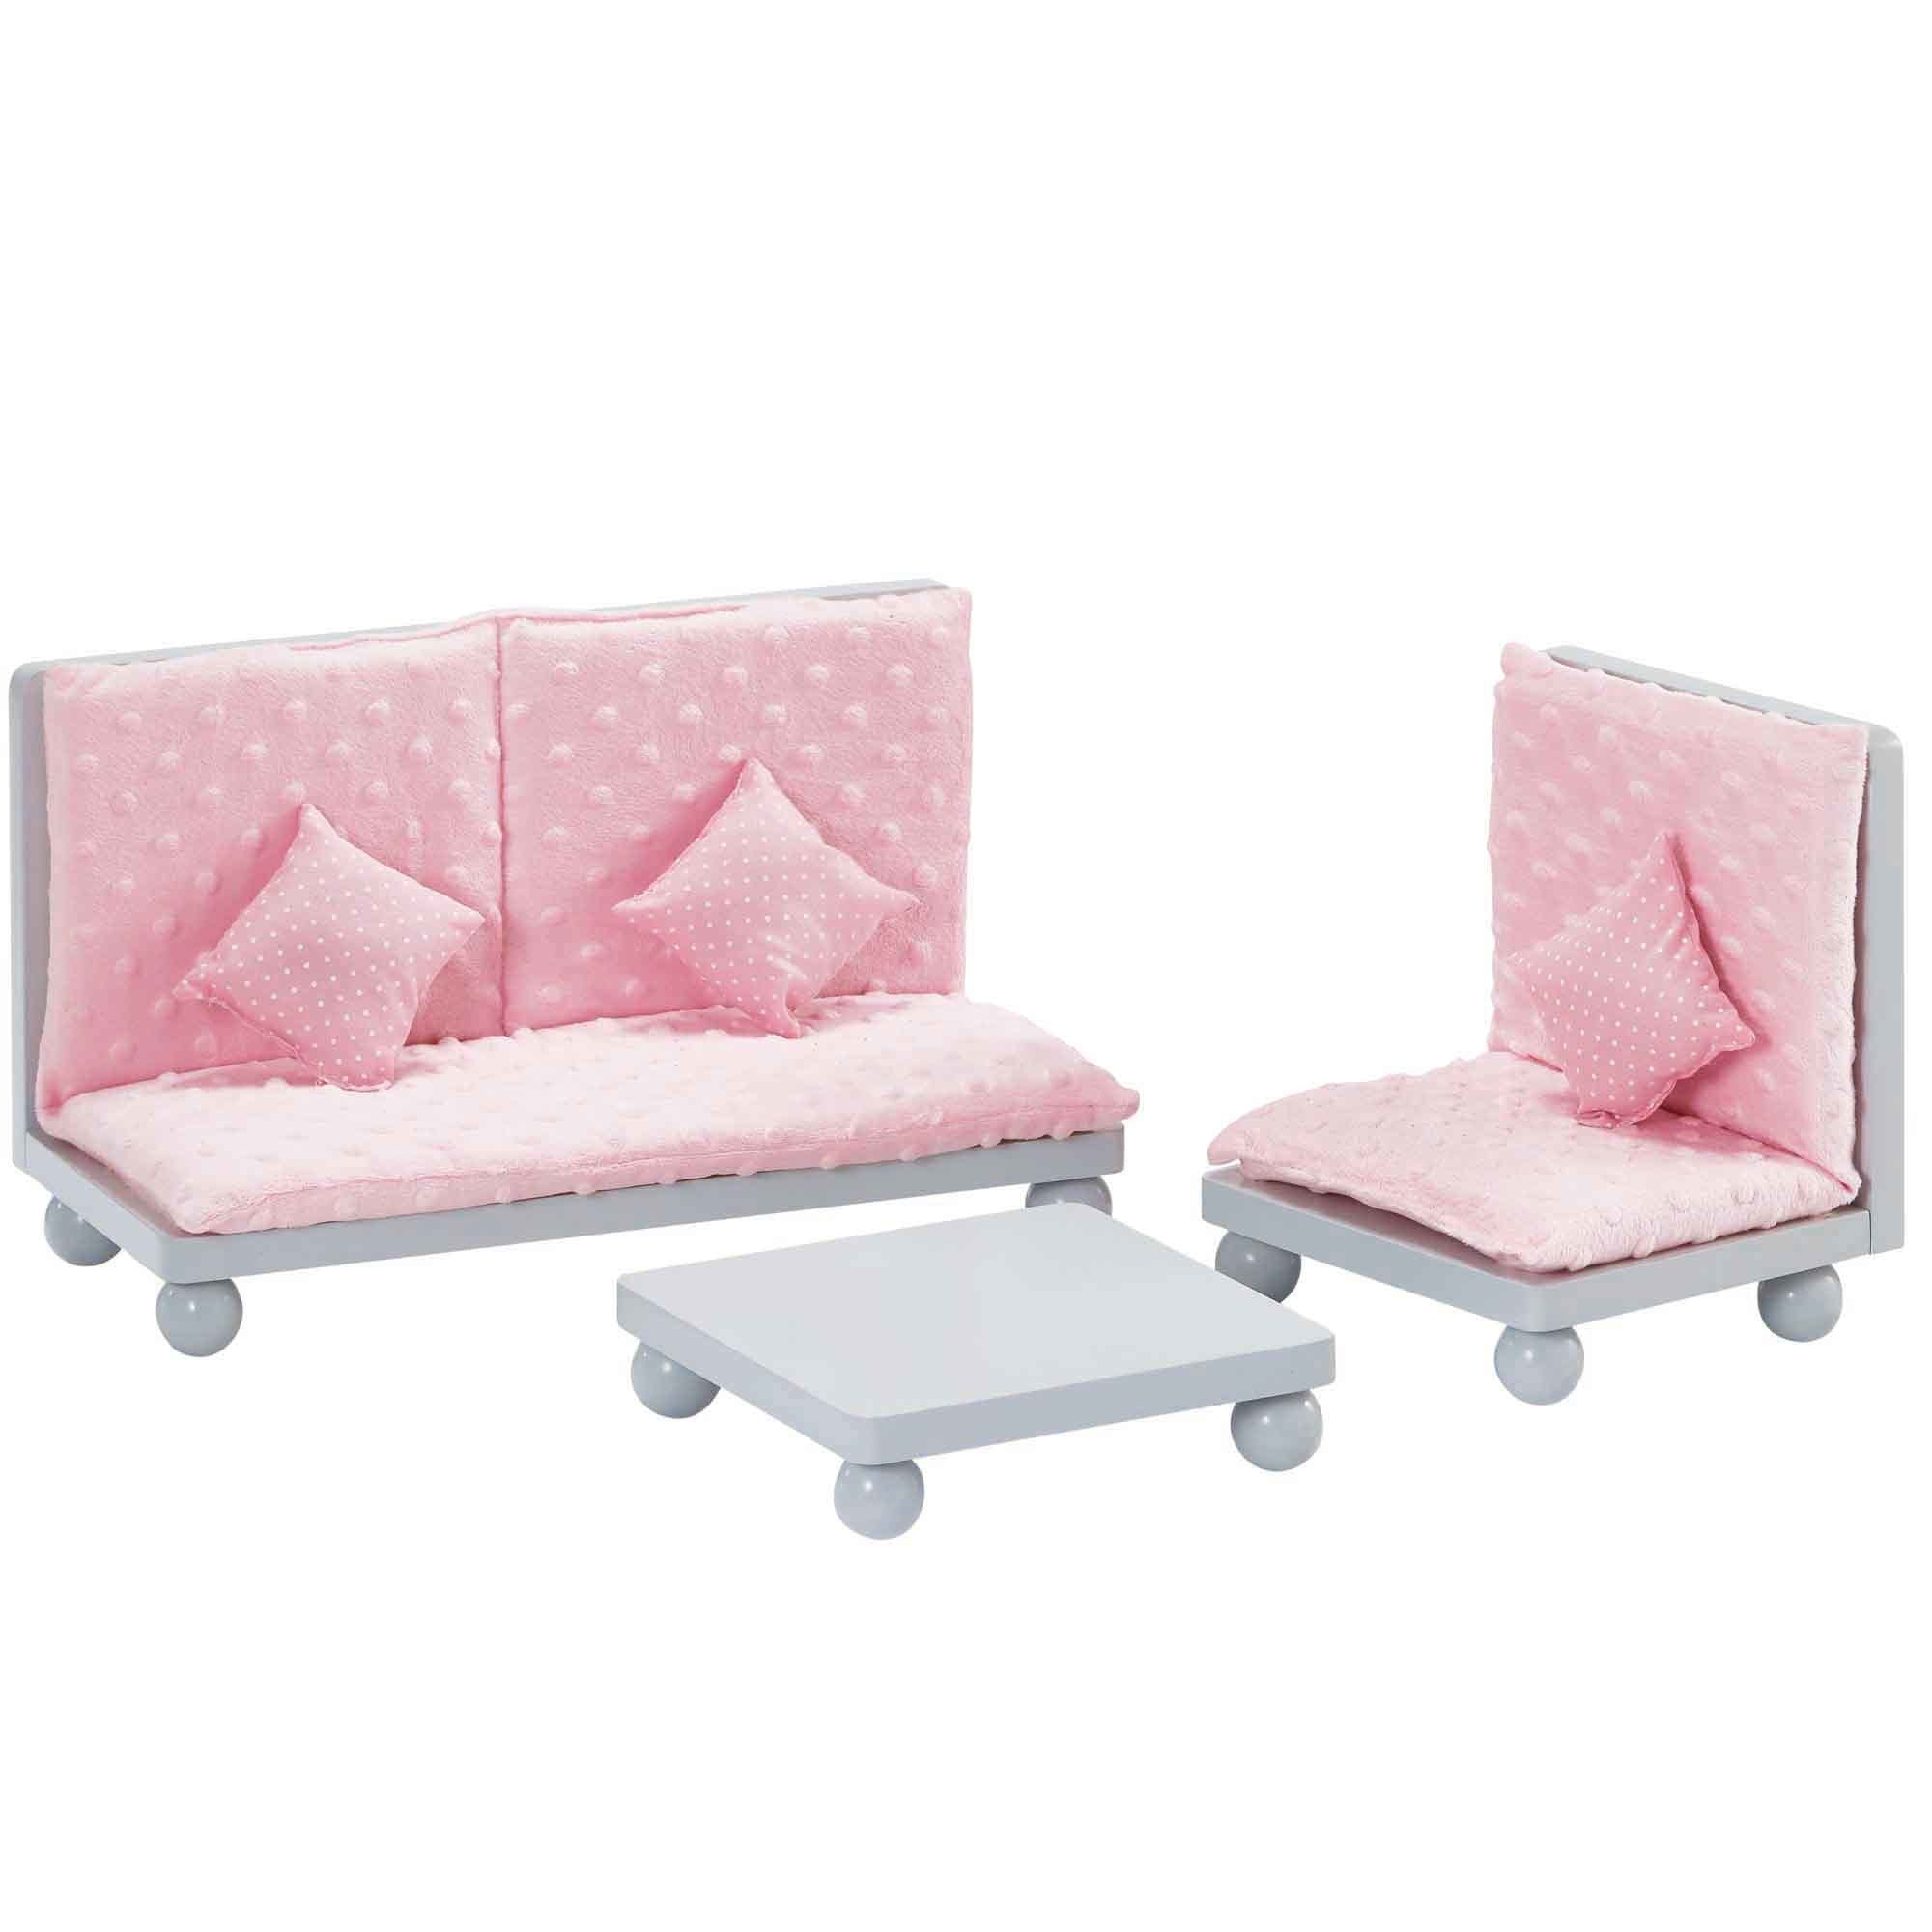 Olivia's Little World Little Princess Lounge Set with Couch, Chair and Coffee Table, Light Pink/Gray